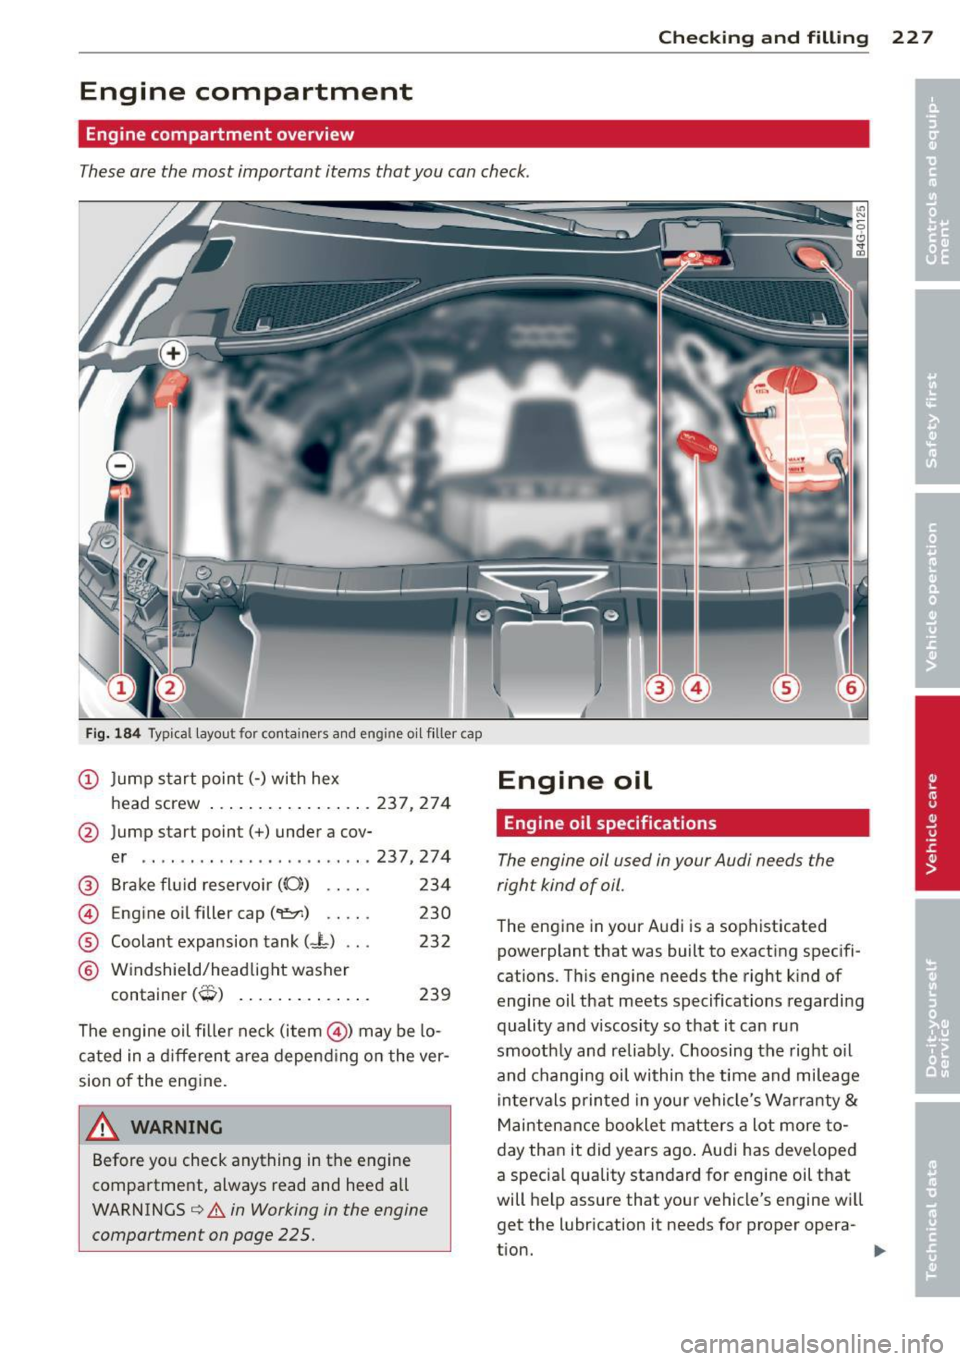 AUDI A6 2013  Owners Manual Checking  and  filling  22 7 
Engine  compartment 
Engine compartment  overview 
These are  the  most  important  items  that  you  can check. 
Fig. 184 Typical layout  for  conta iners  and  engine  